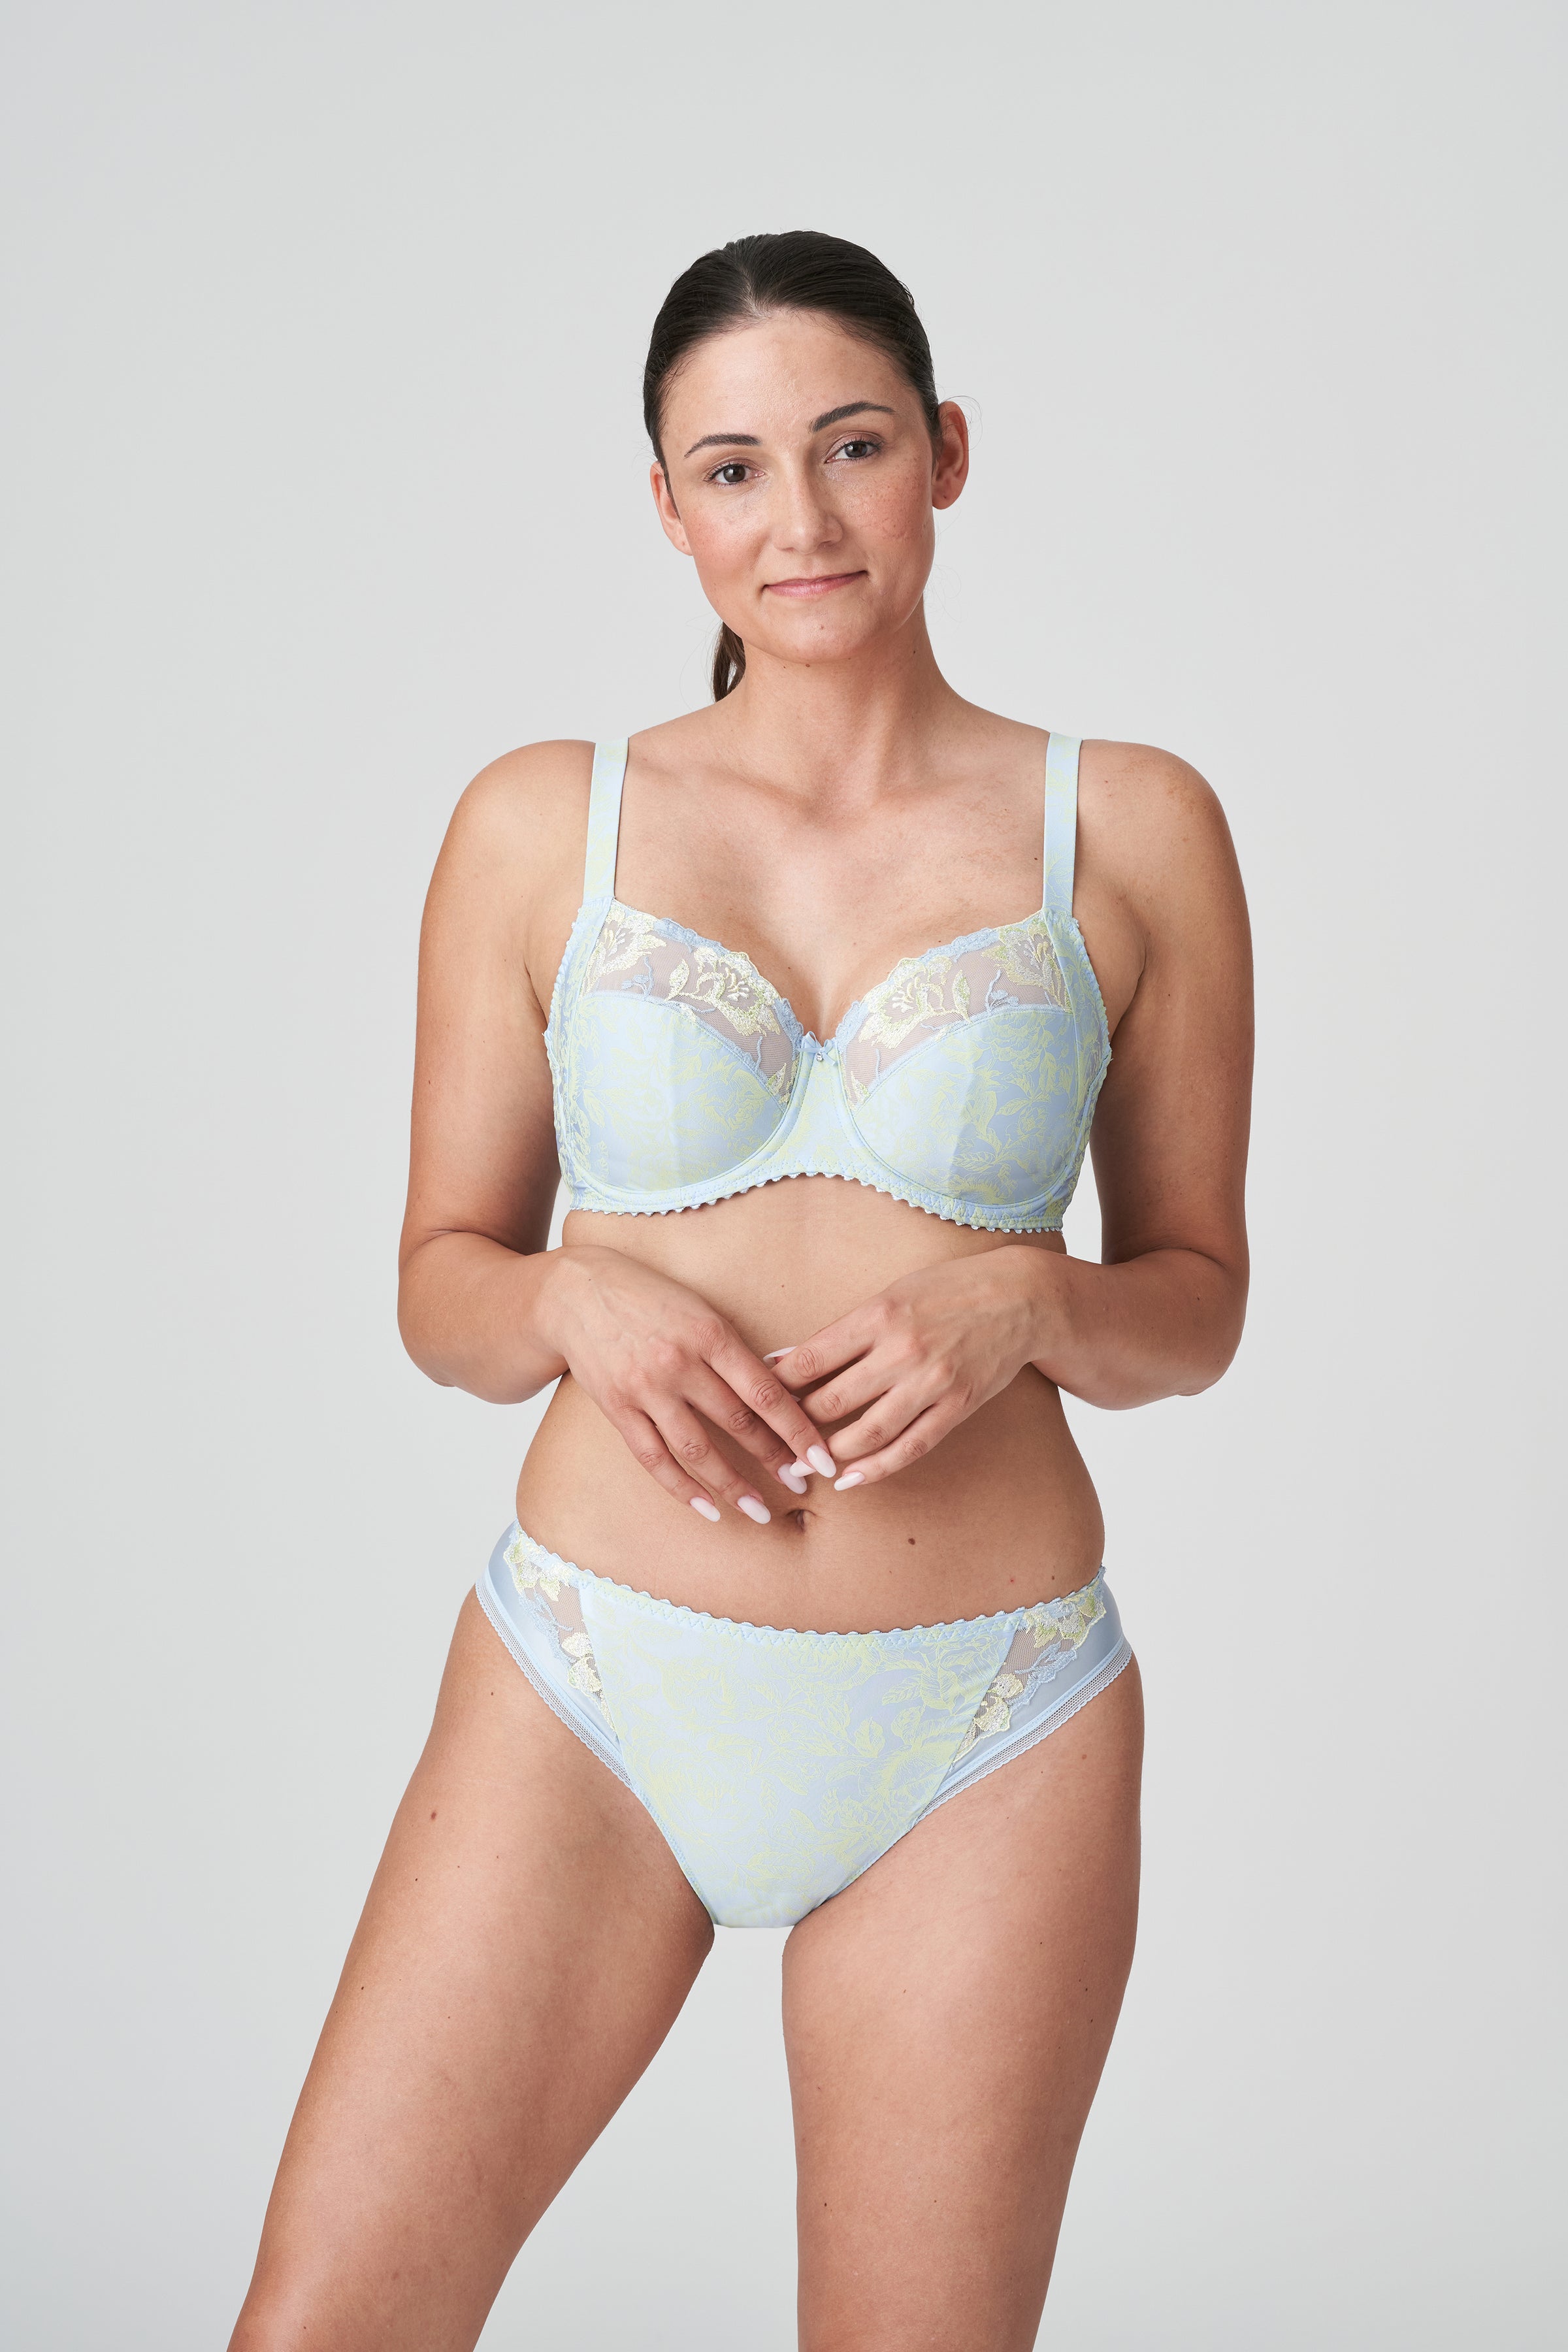 Bravissimo: NEW IN!, Supporting you with lots of lovely lingerie